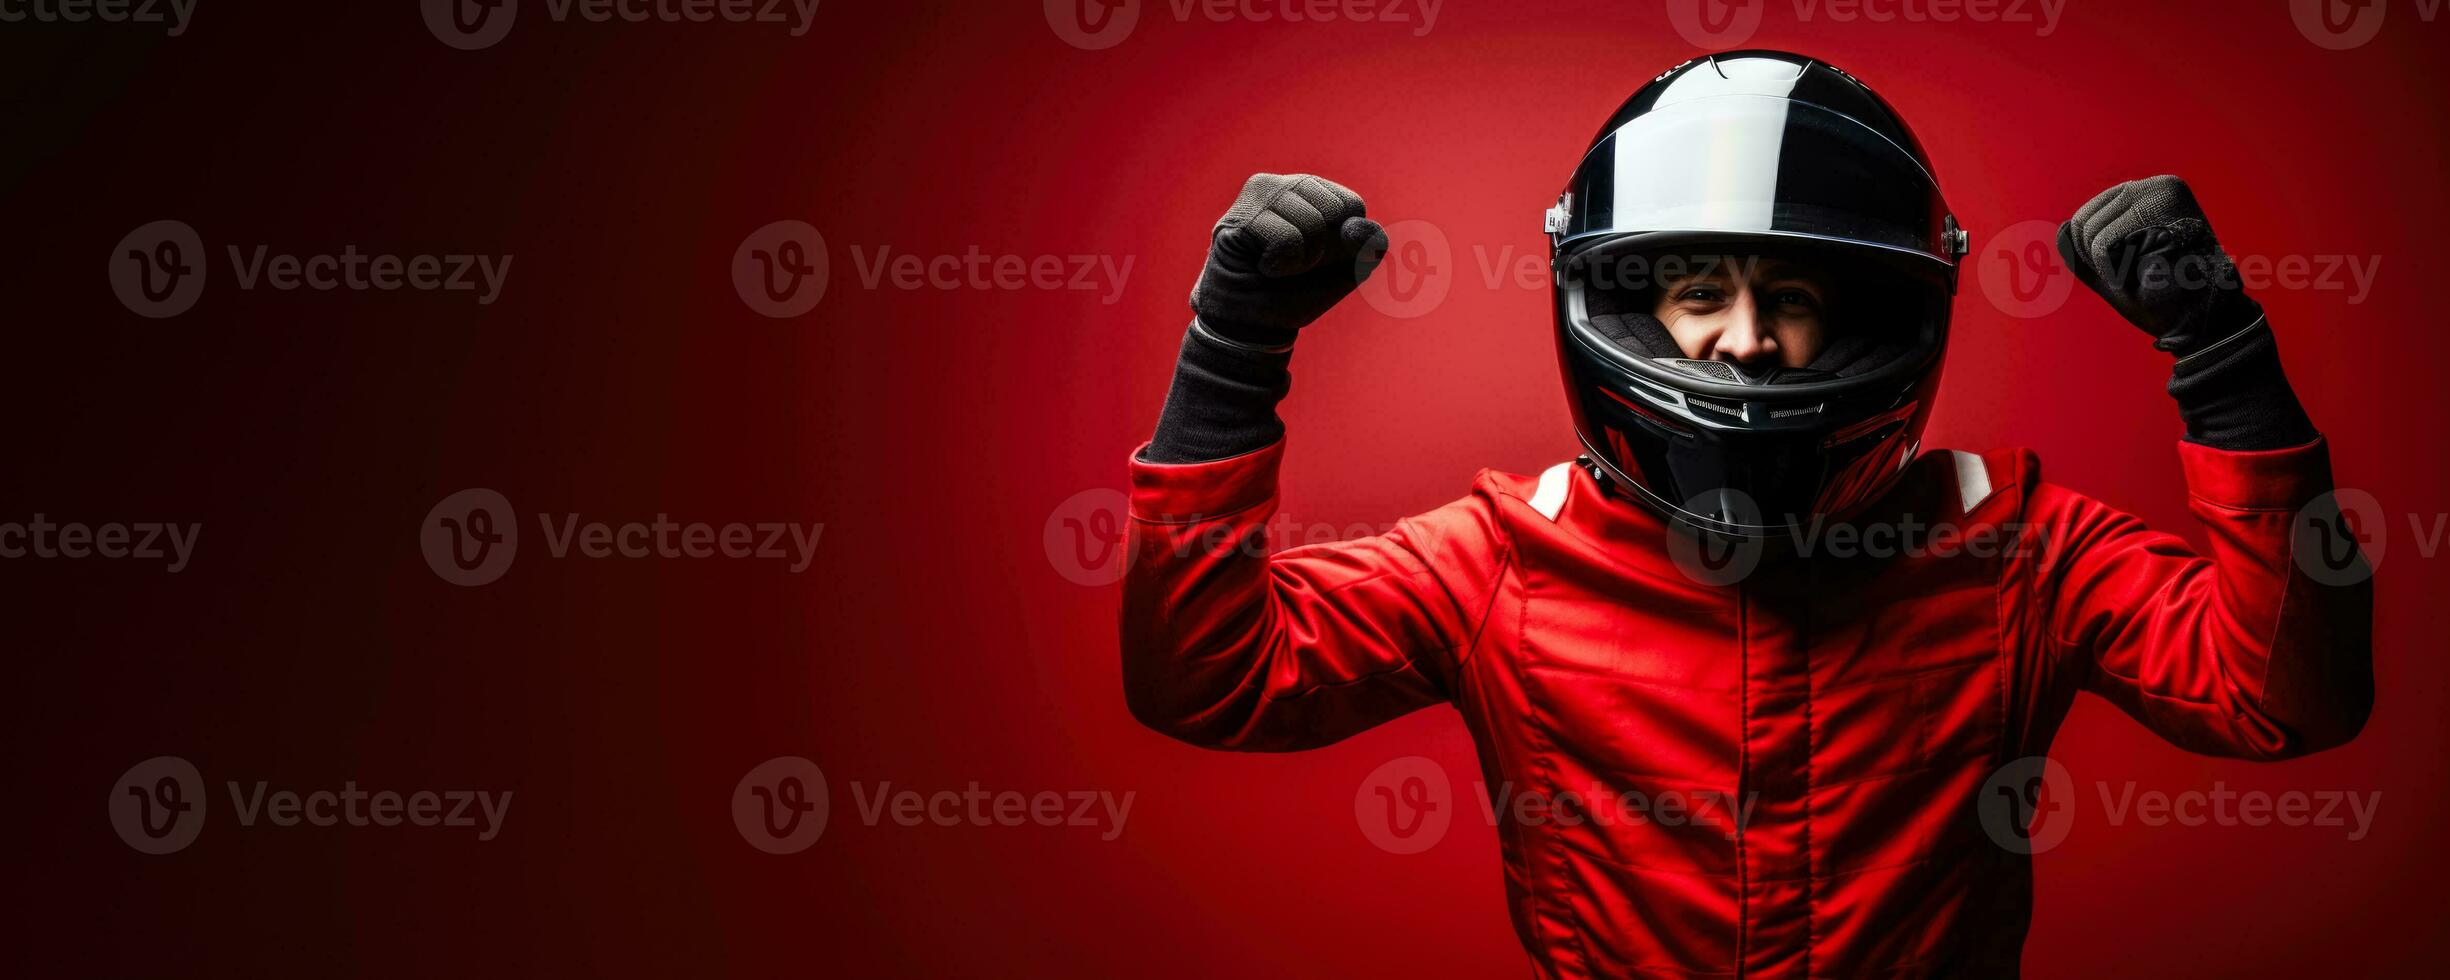 Car racing driver celebrating a first-place finish with a victory lap on red background with empty space for text photo